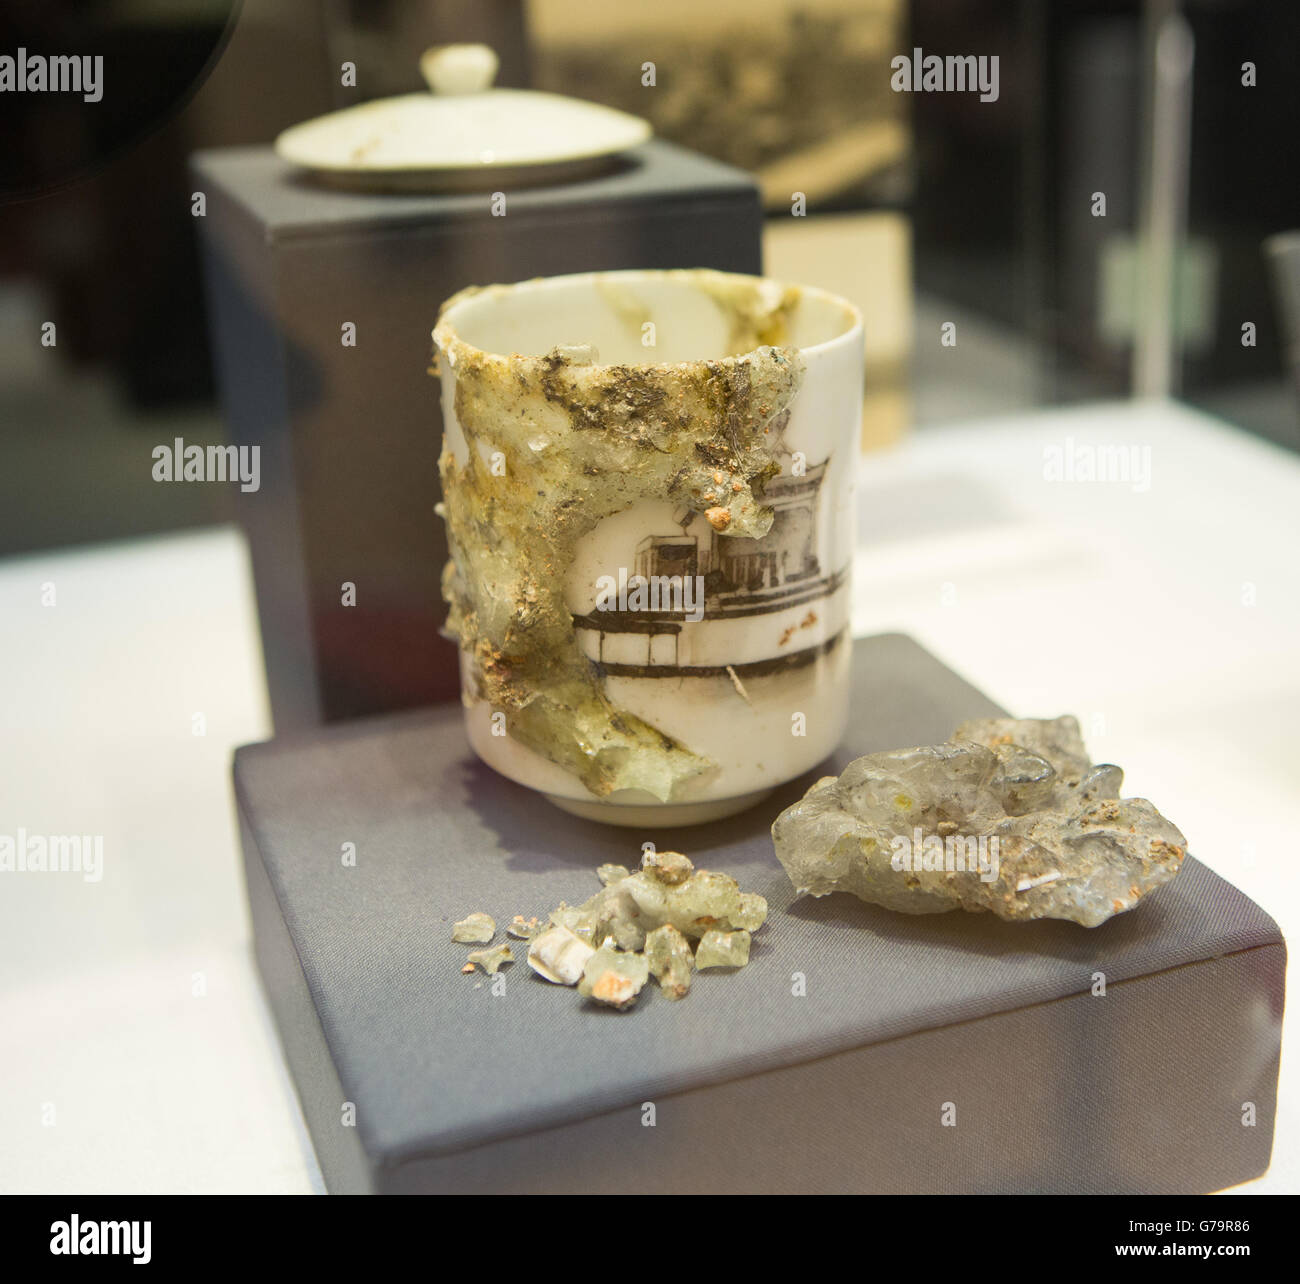 A Japanese jar and cover from the blast zone of Hiroshima in 1945 is part of the Famous and Infamous exhibition which includes highlights from the collection of Jersey collector David Gainsborough Roberts at Christie's in London. Stock Photo